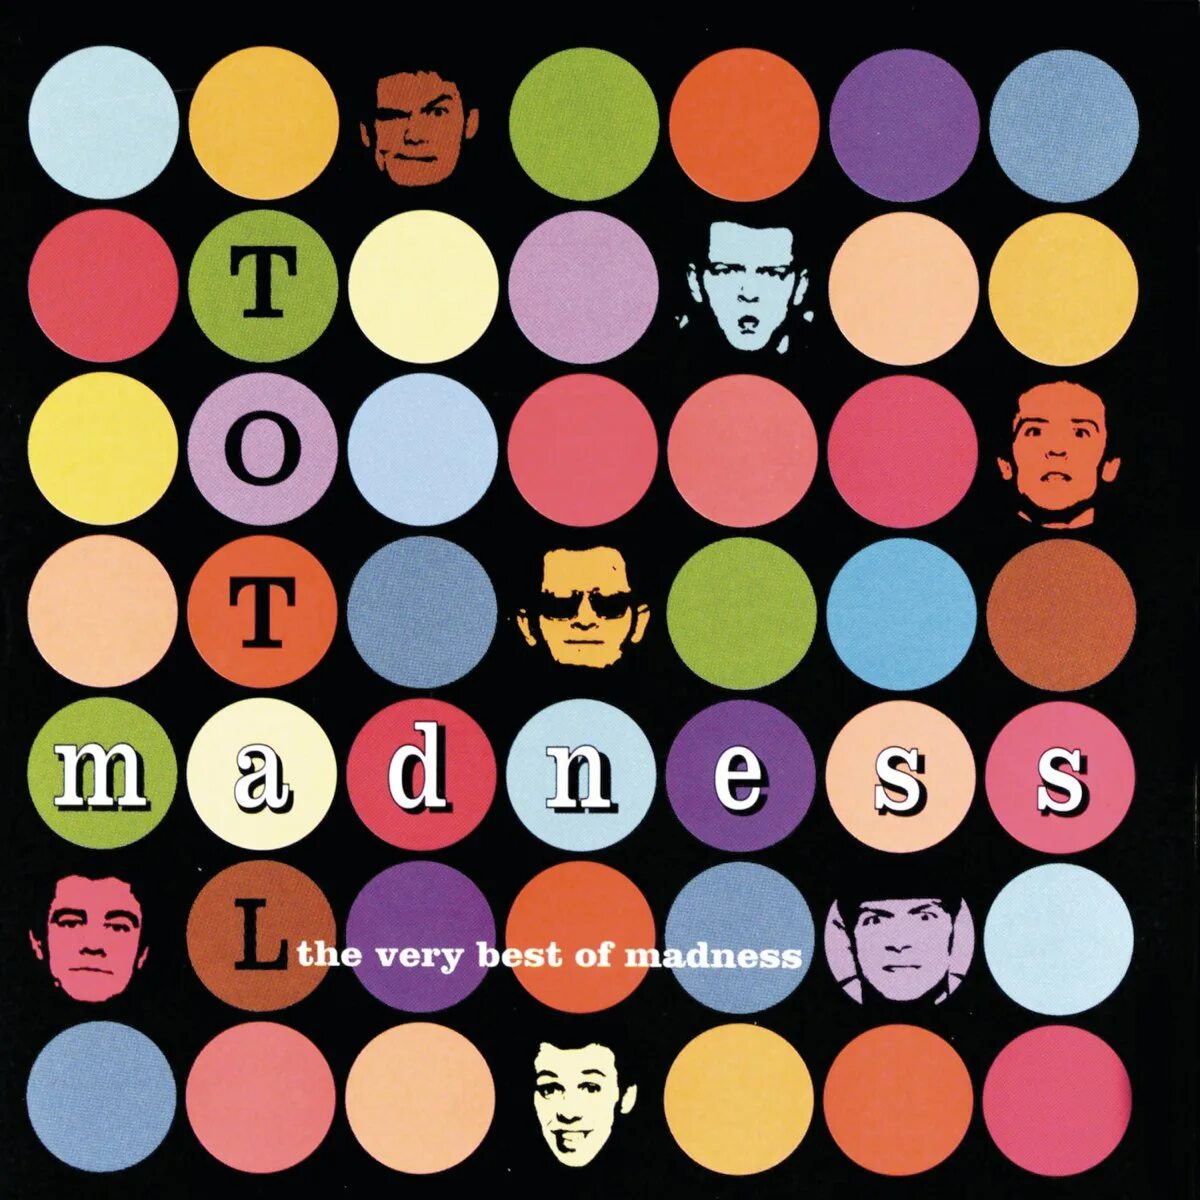 Madness the very best of Madness. Madness Full House (the very best of Madness). Madness "one Step Beyond". Madness — the very best of (4lp).